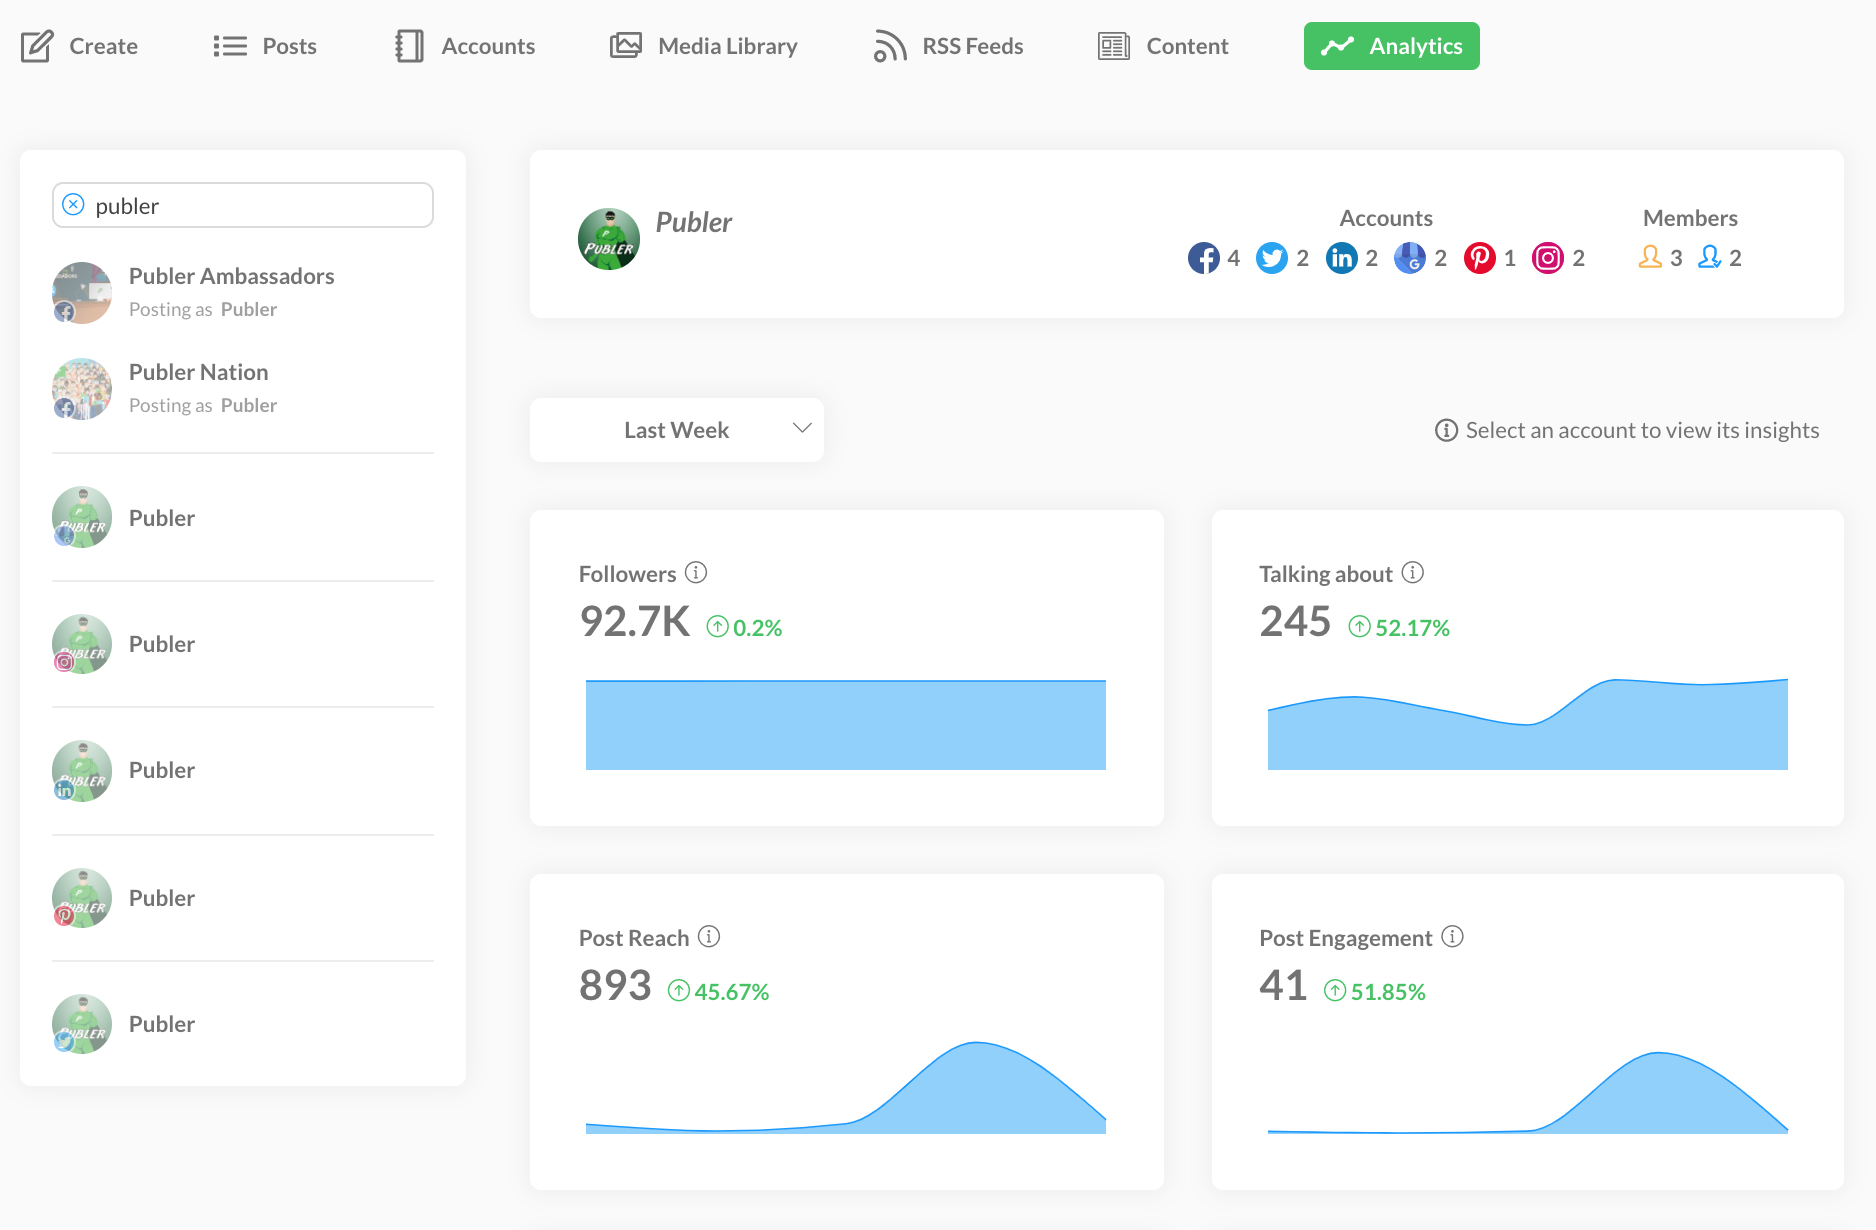 Publer Software - View insights from across all social networks